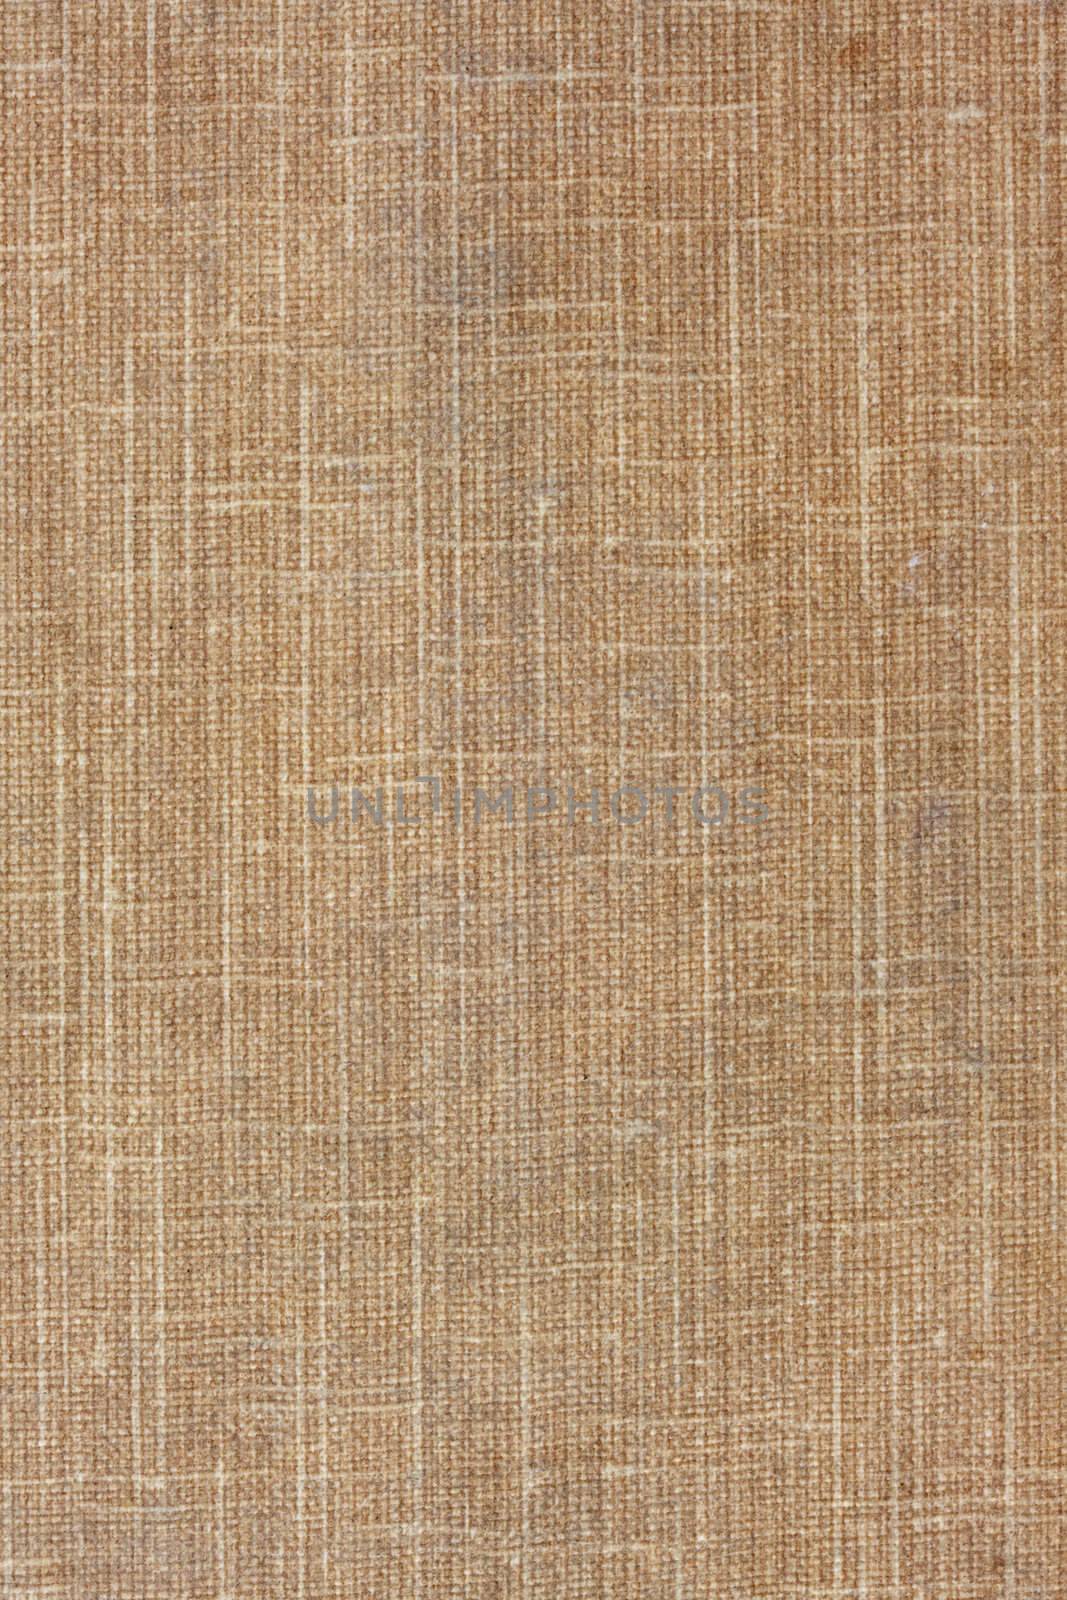 brown (beige) textile background from a vintage book cover with some stains and scratches